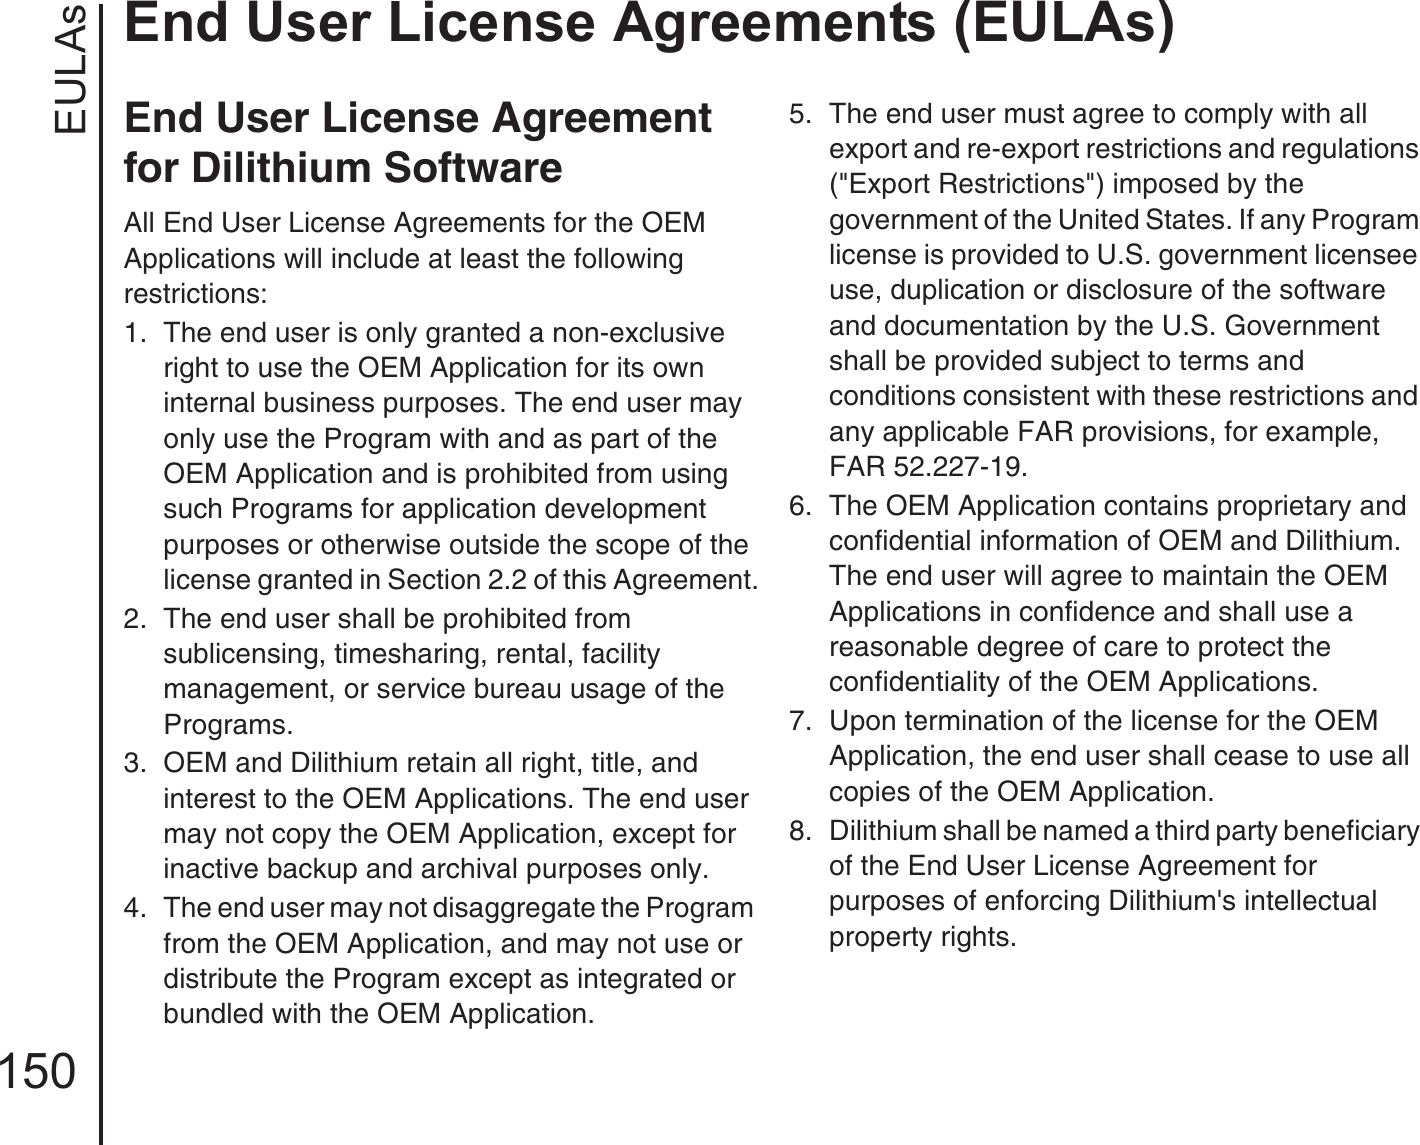 EULAsEnd User License Agreements (EULAs)150End User License Agreement for Dilithium SoftwareAll End User License Agreements for the OEM Applications will include at least the following restrictions:1.  The end user is only granted a non-exclusive right to use the OEM Application for its own internal business purposes. The end user may only use the Program with and as part of the OEM Application and is prohibited from using such Programs for application development purposes or otherwise outside the scope of the license granted in Section 2.2 of this Agreement.2.  The end user shall be prohibited from sublicensing, timesharing, rental, facility management, or service bureau usage of the Programs.3.  OEM and Dilithium retain all right, title, and interest to the OEM Applications. The end user may not copy the OEM Application, except for inactive backup and archival purposes only.4.  The end user may not disaggregate the Program from the OEM Application, and may not use or distribute the Program except as integrated or bundled with the OEM Application.5.  The end user must agree to comply with all export and re-export restrictions and regulations (&quot;Export Restrictions&quot;) imposed by the government of the United States. If any Program license is provided to U.S. government licensee use, duplication or disclosure of the software and documentation by the U.S. Government shall be provided subject to terms and conditions consistent with these restrictions and any applicable FAR provisions, for example, FAR 52.227-19.6.  The OEM Application contains proprietary and confidential information of OEM and Dilithium. The end user will agree to maintain the OEM Applications in confidence and shall use a reasonable degree of care to protect the confidentiality of the OEM Applications.7.  Upon termination of the license for the OEM Application, the end user shall cease to use all copies of the OEM Application.8.  Dilithium shall be named a third party beneficiary of the End User License Agreement for purposes of enforcing Dilithium&apos;s intellectual property rights.